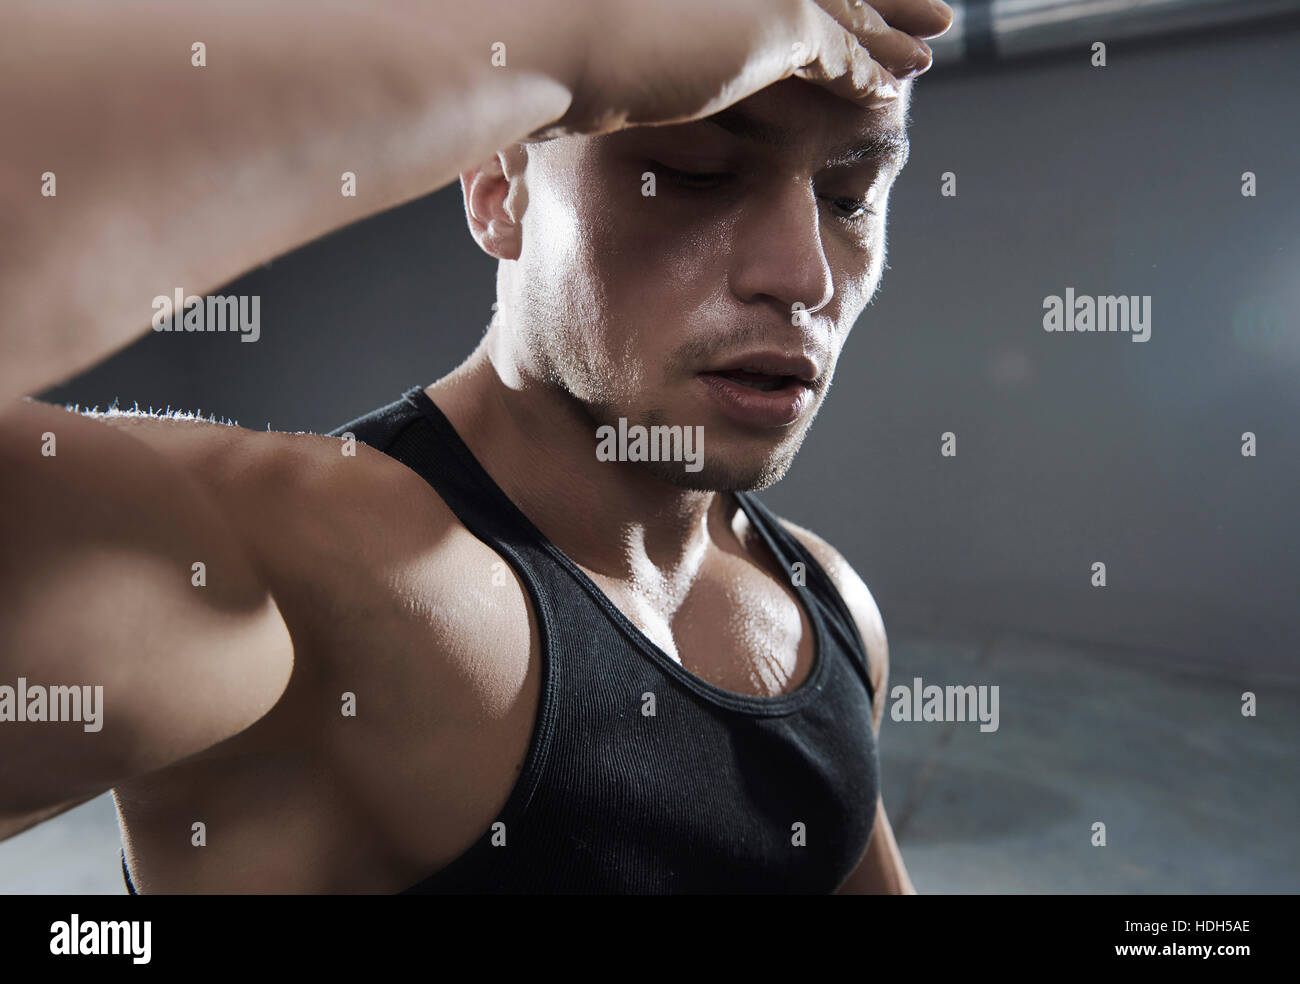 Exercising can be very tiring Stock Photo